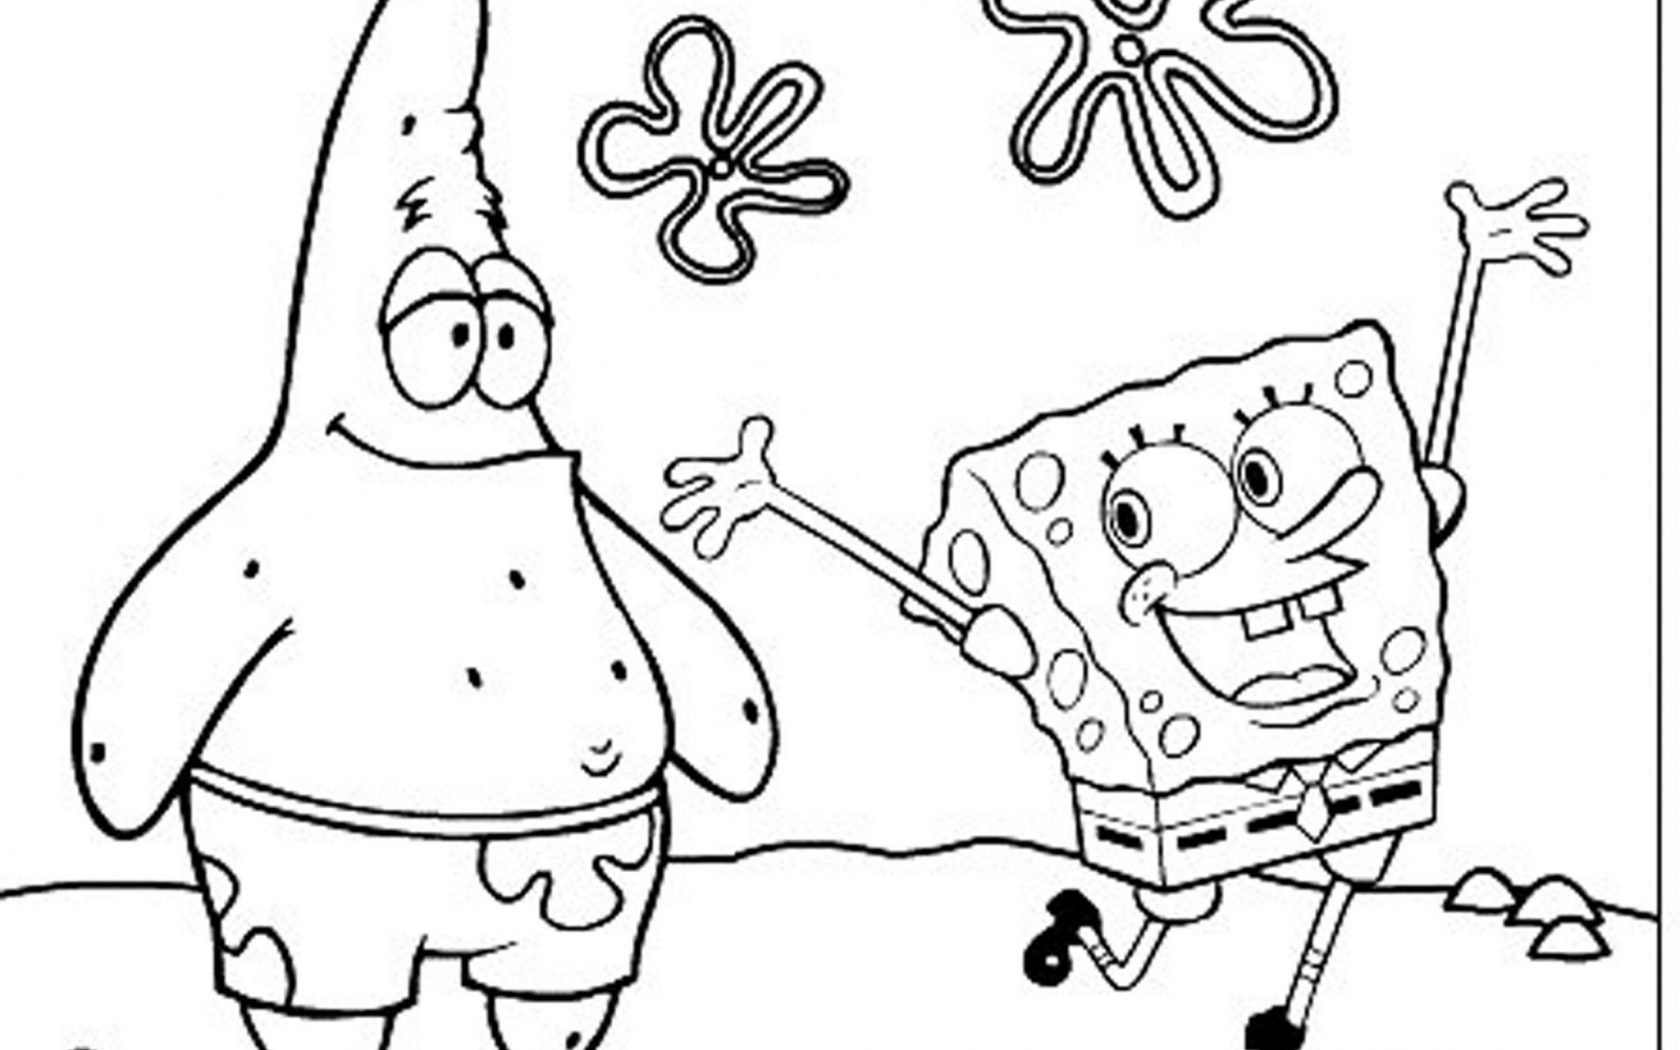 easy spongebob coloring pages